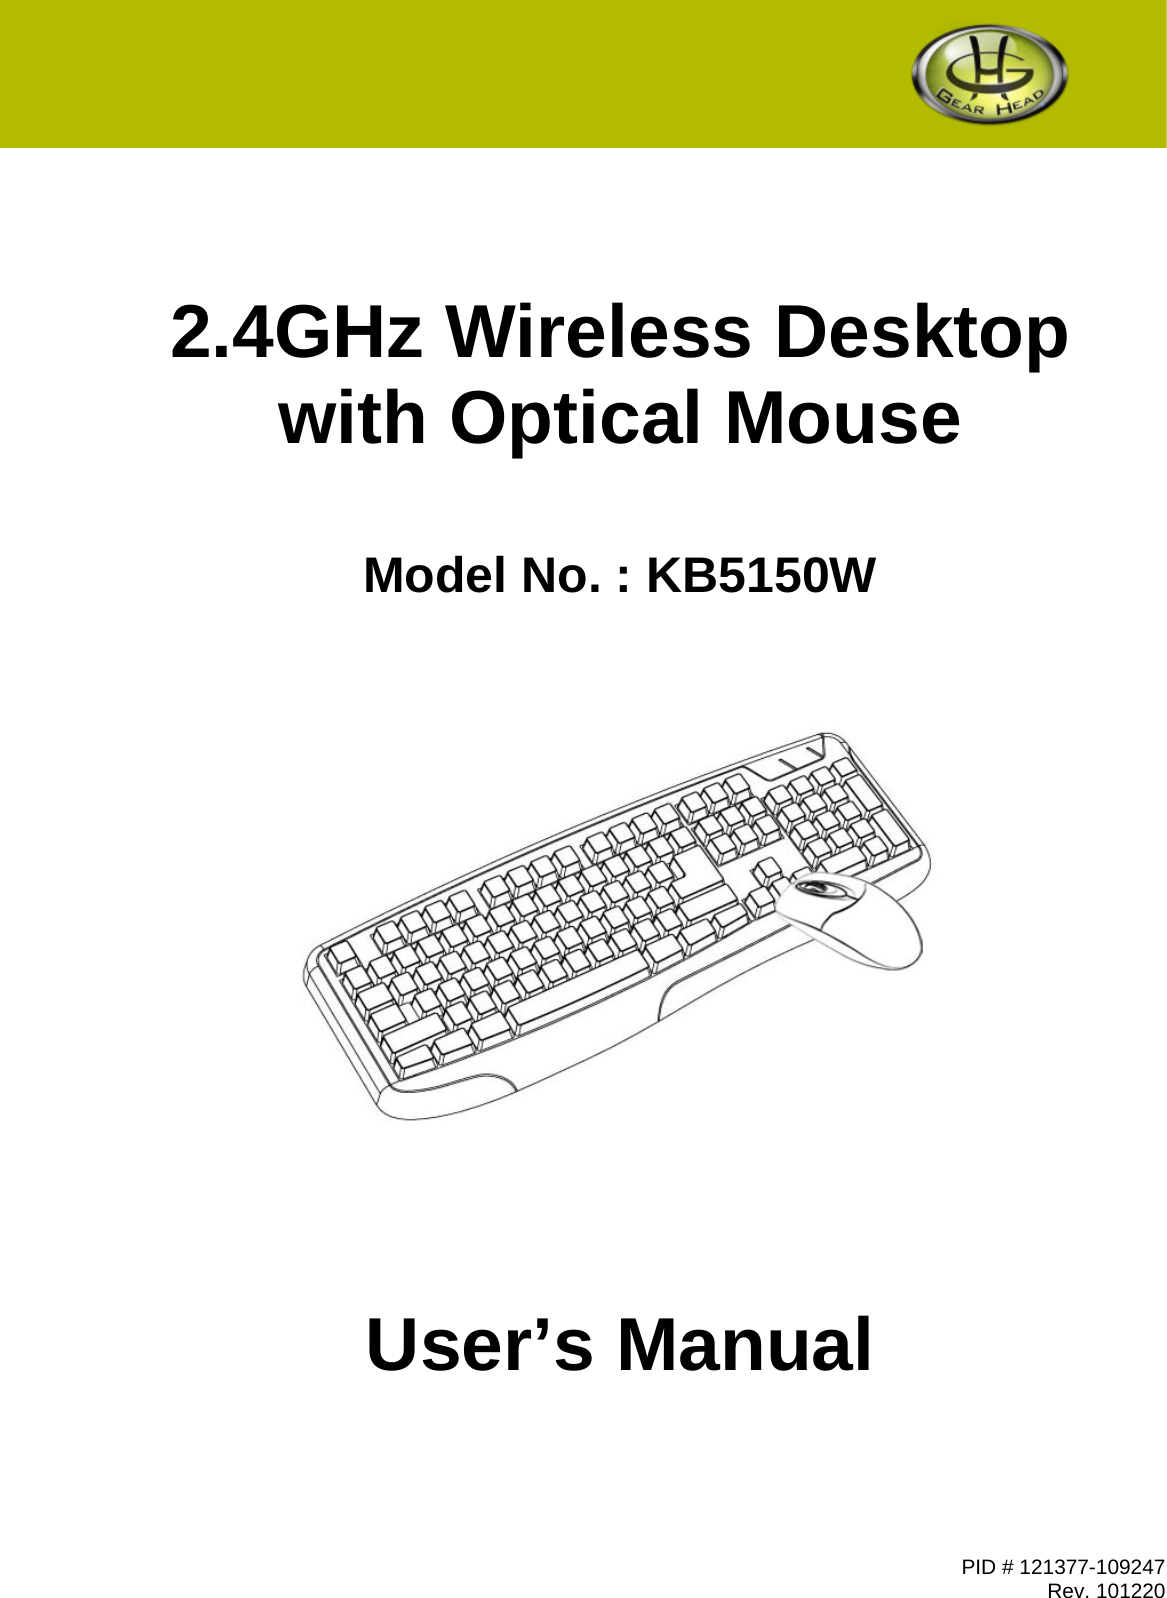               2.4GHz Wireless Desktop  with Optical Mouse    Model No. : KB5150W           User’s Manual PID # 121377-109247 Rev. 101220 